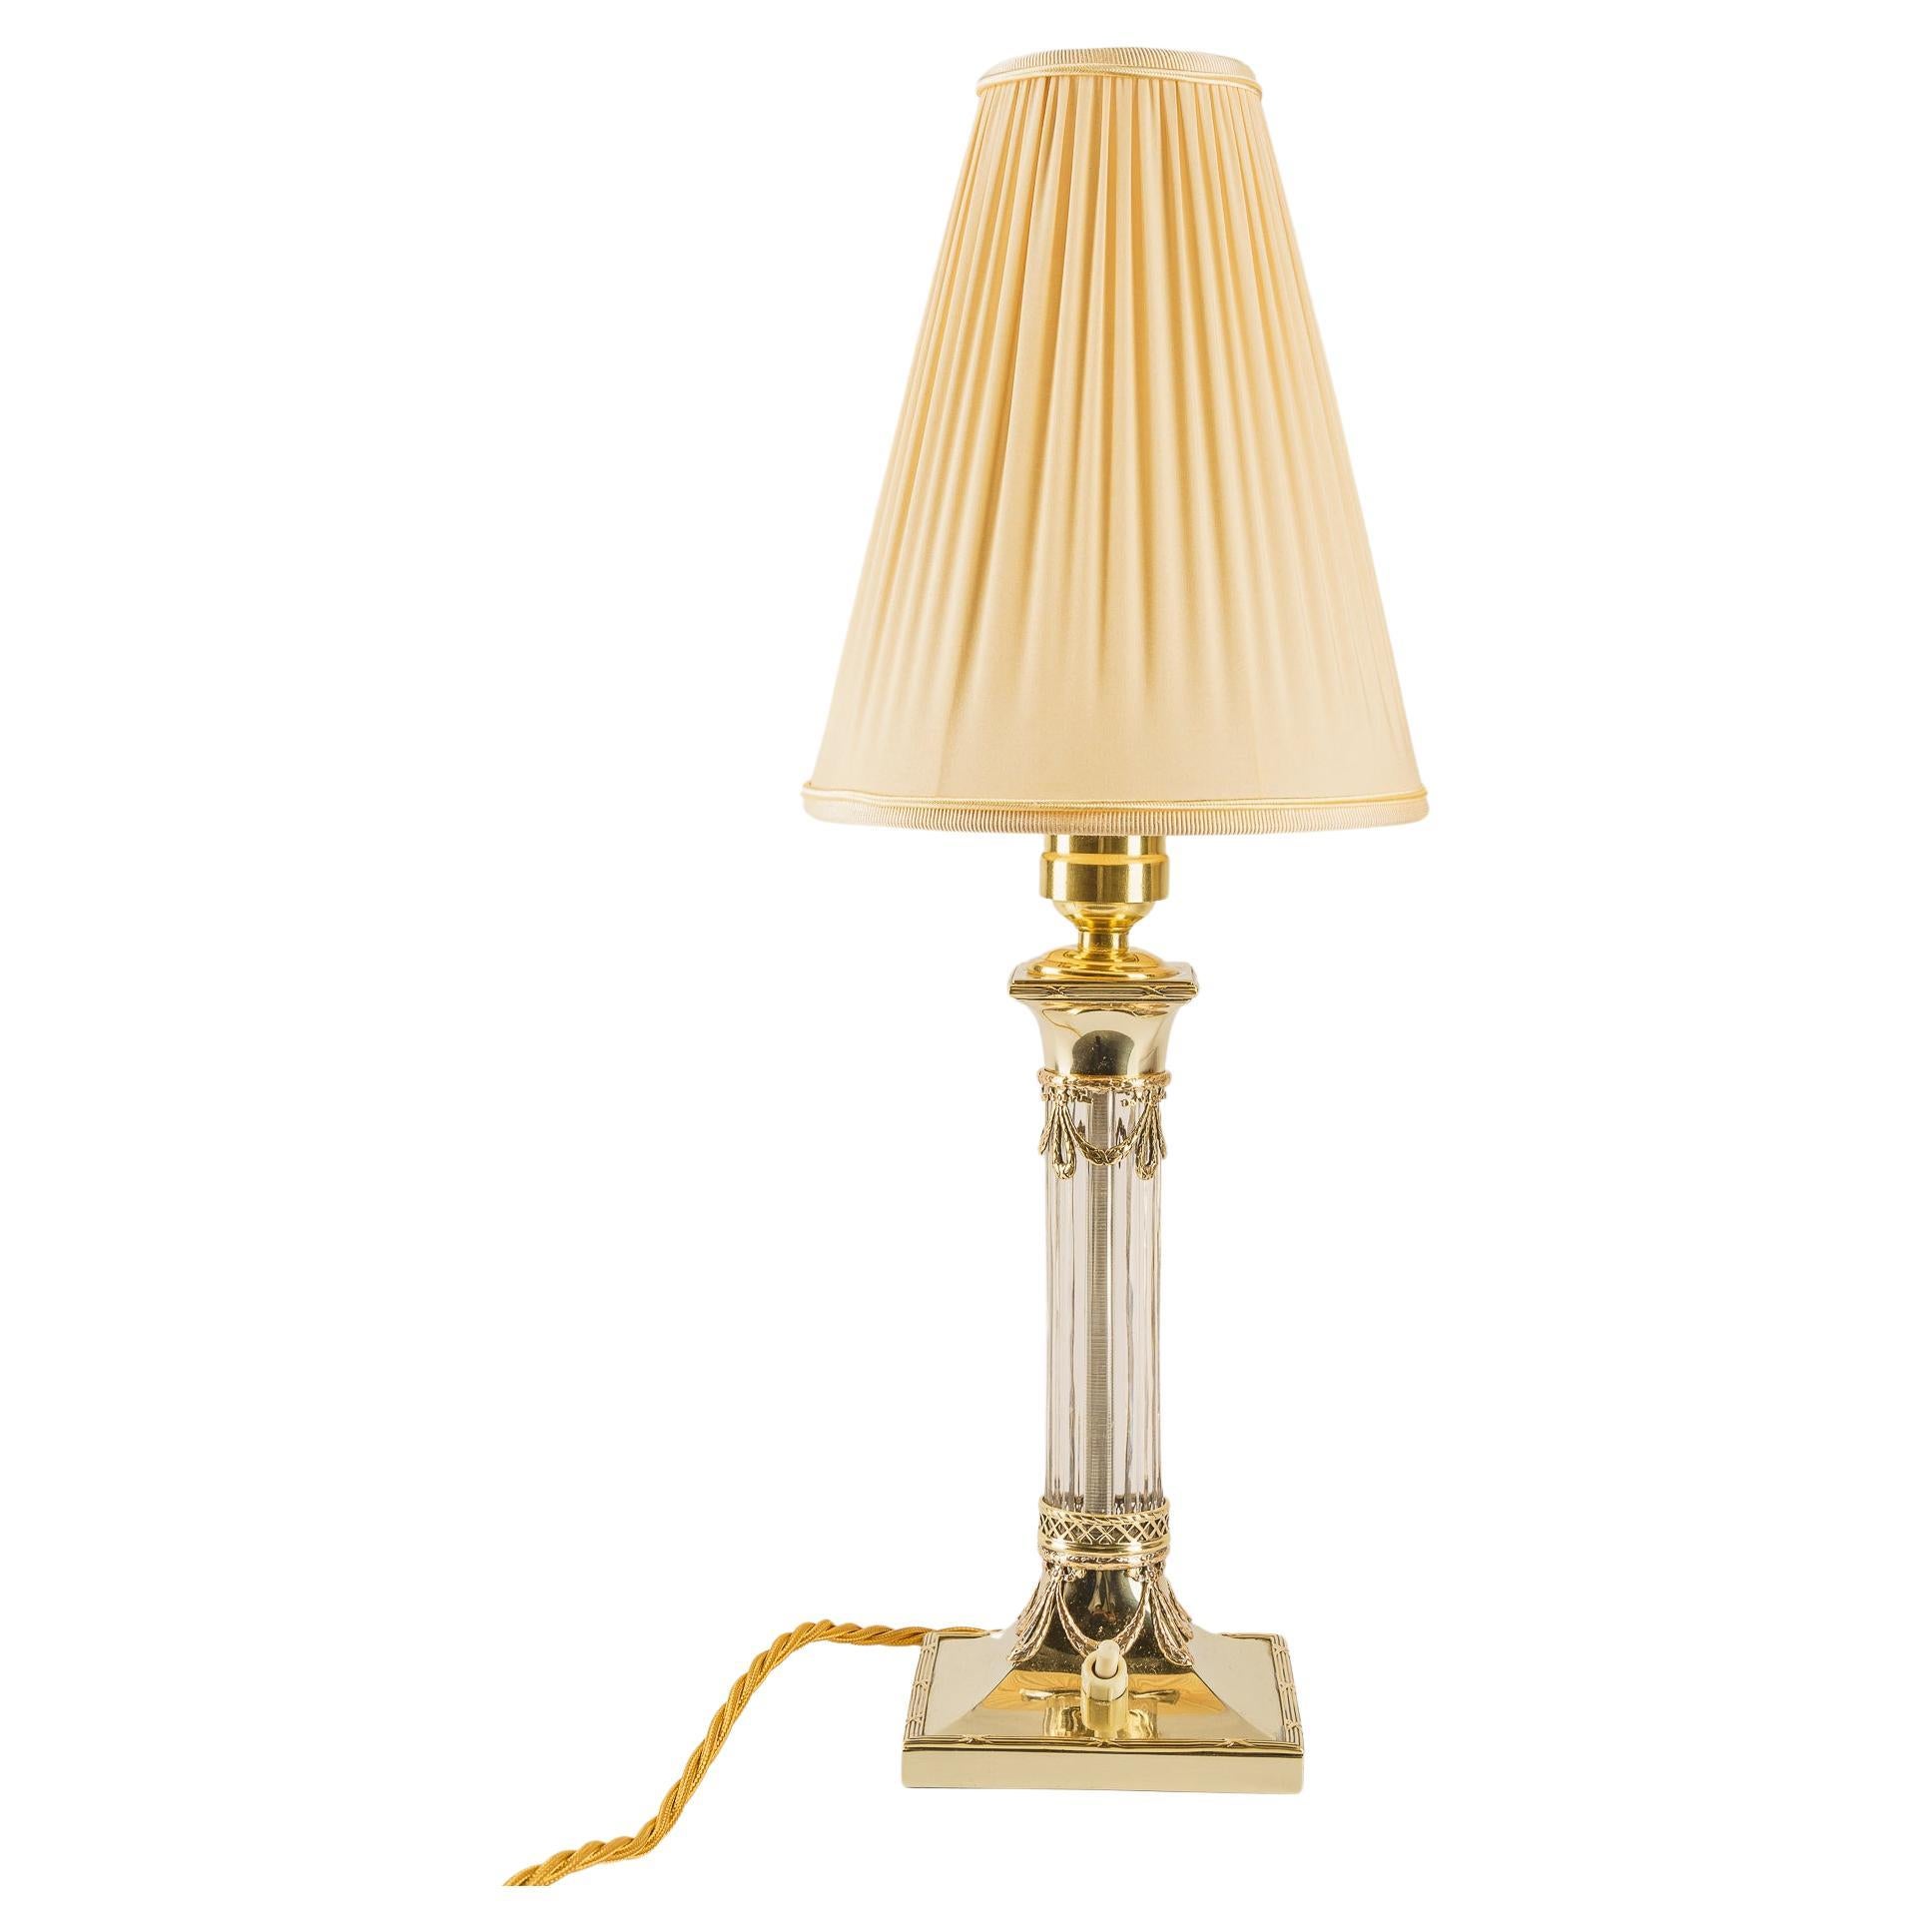 Jugendstil table lamp with fabric shade vienna around 1910 